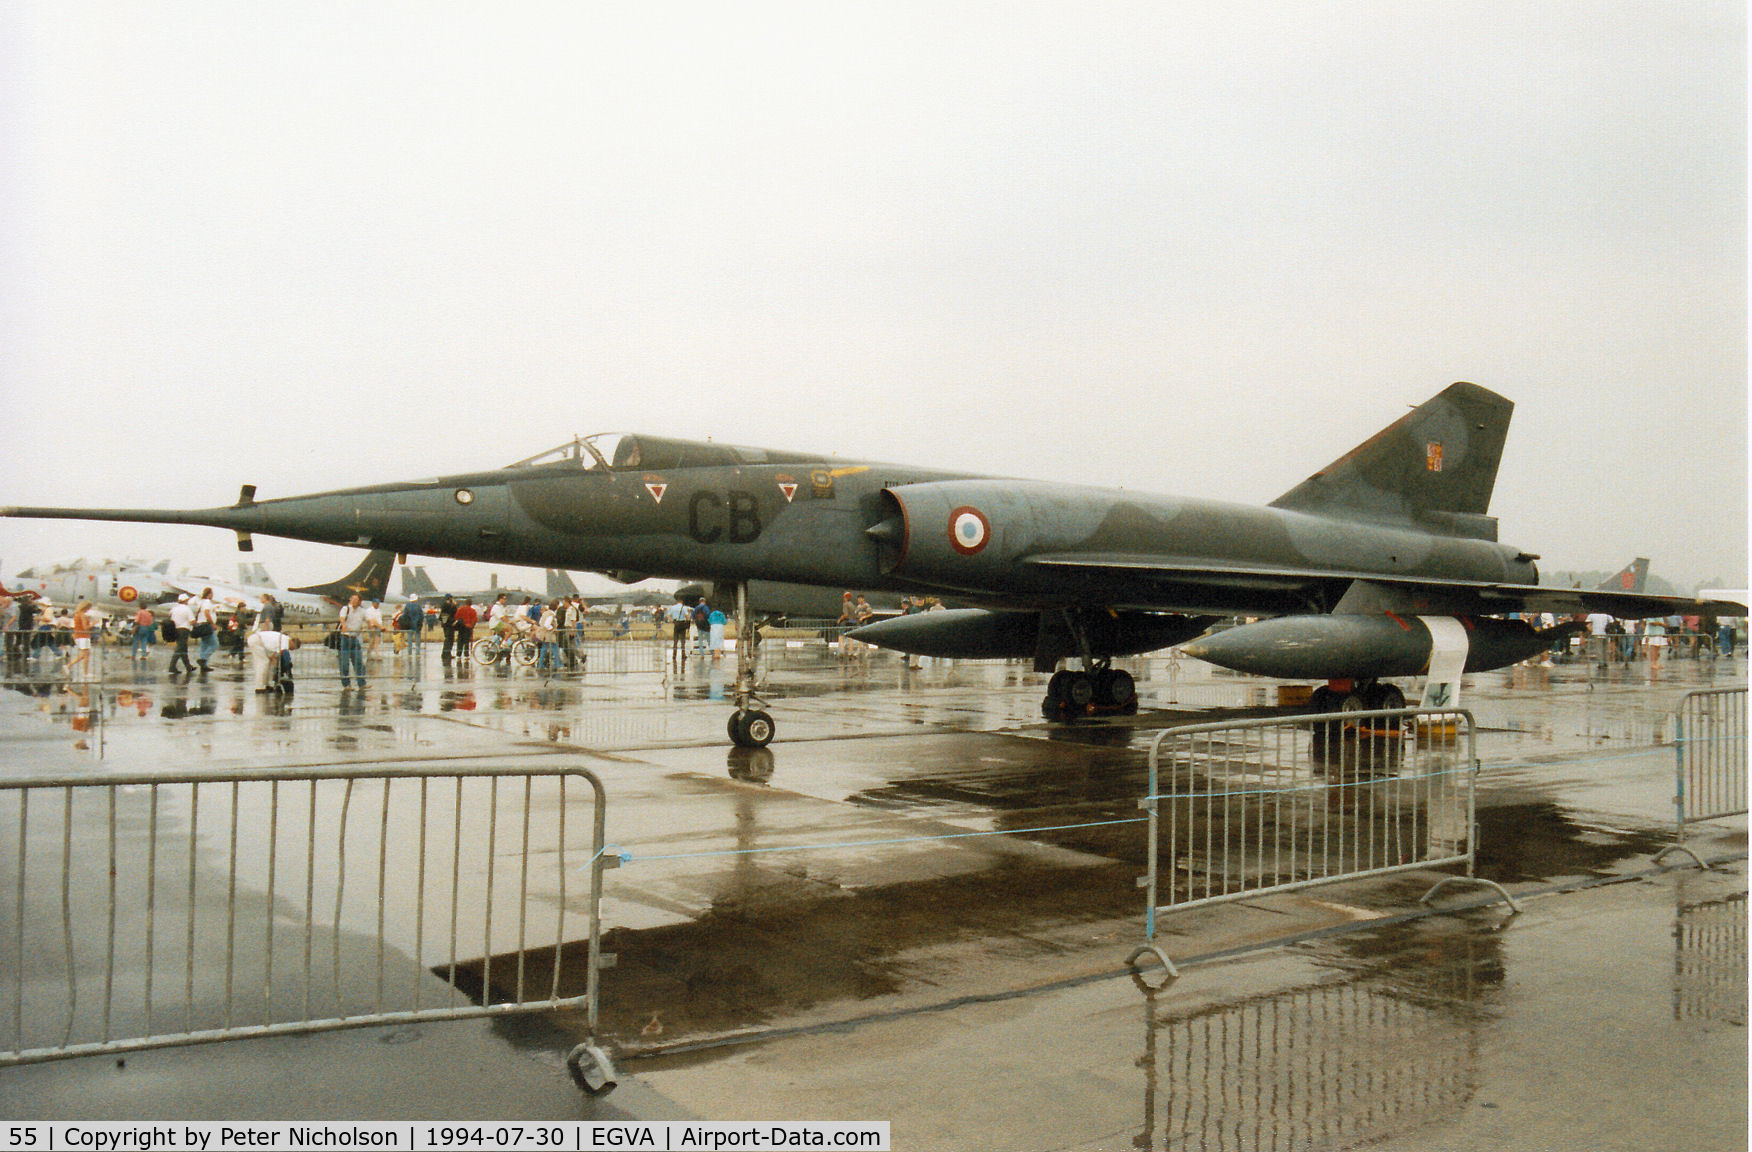 55, Dassault Mirage IVP C/N 55, Another view of the EB01.091 Mirage IVP of the French Air Force on display at the 1994 Intnl Air Tattoo at RAF Fairford.